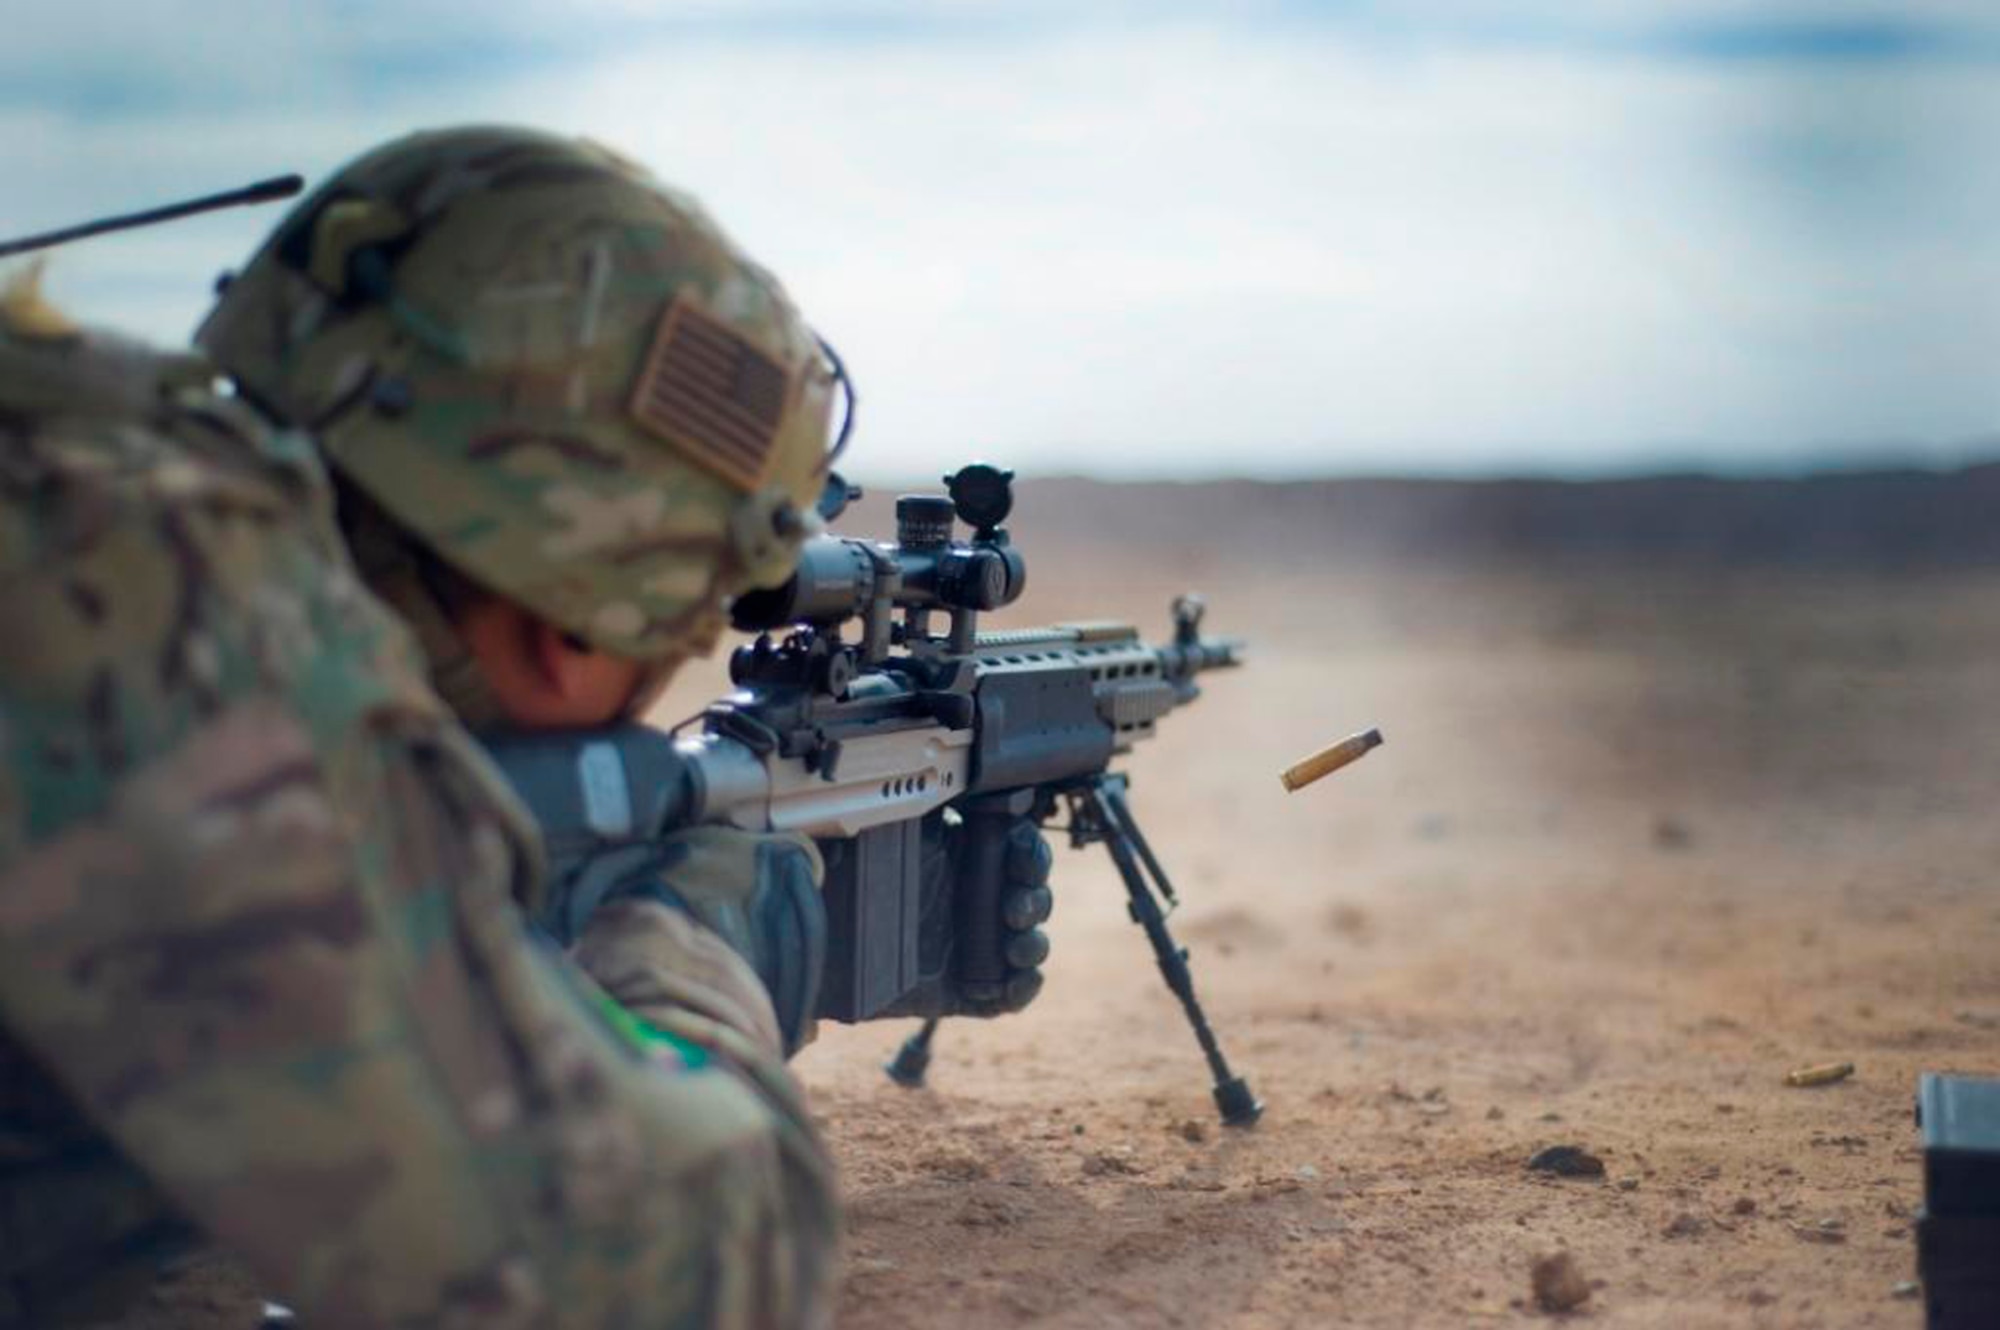 Master Sgt. Manuel Herrera, a 466th Operating Location Delta Explosives Ordinance Disposal team lead, fires an Mk 14 enhanced battle rifle while at a firing range at Camp Leatherneck, Afghanistan, Dec. 28, 2012. After identifying the need for a more capable rifle while outside the wire, Delta upgraded its dismount teams with the EBR, enhancing their ability to retaliate to long-distance hostile fire. (U.S. Air Force photo/Tech. Sgt. Swift Moon)